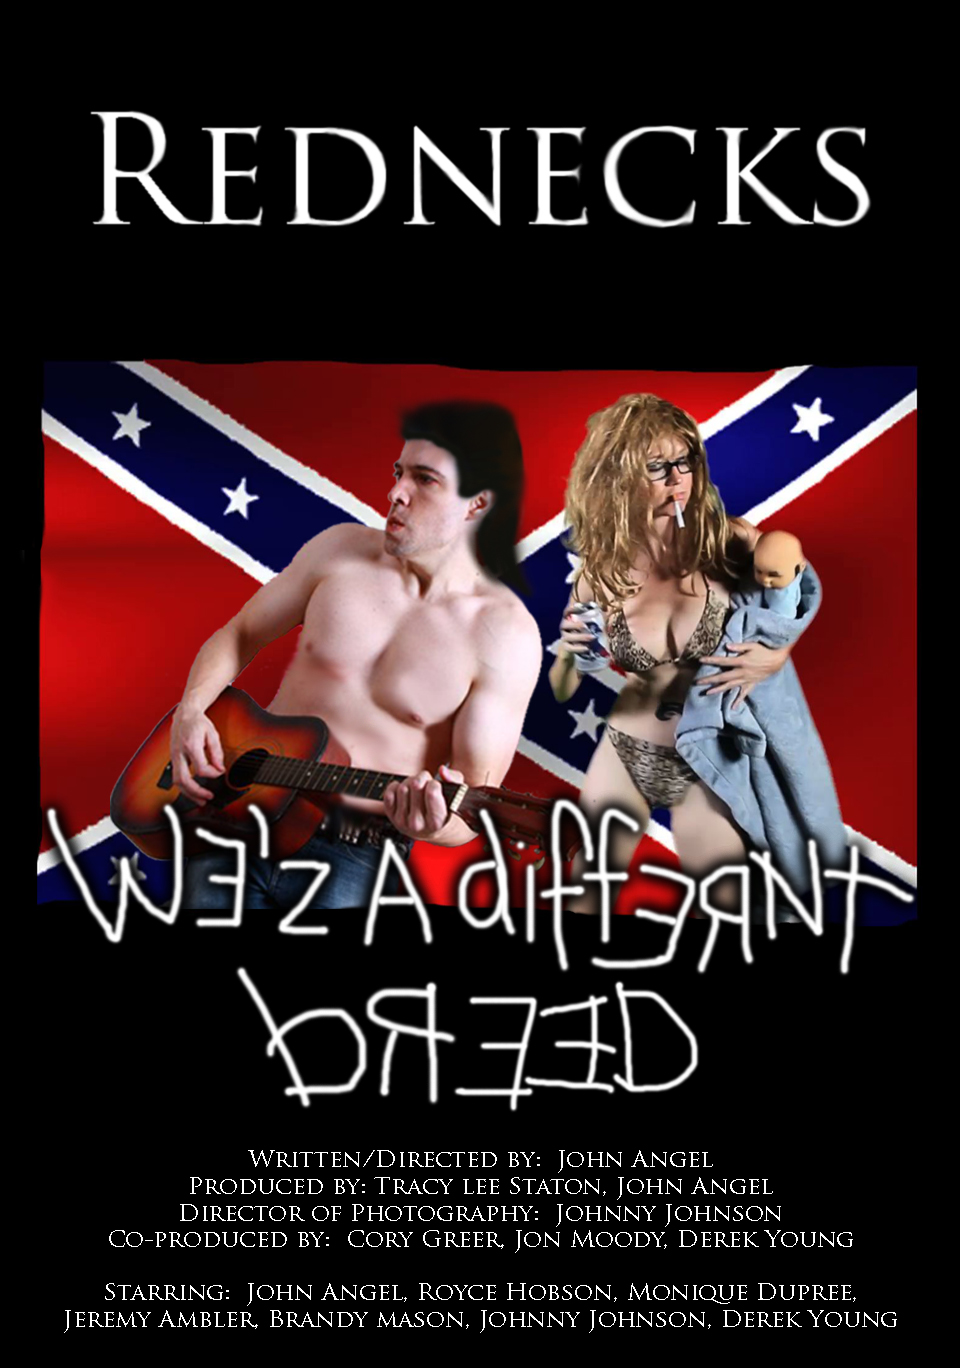 Teaser poster for movie currently in pre-production: Rednecks. Writeen/Directed/Produced by and Starring John Angel.